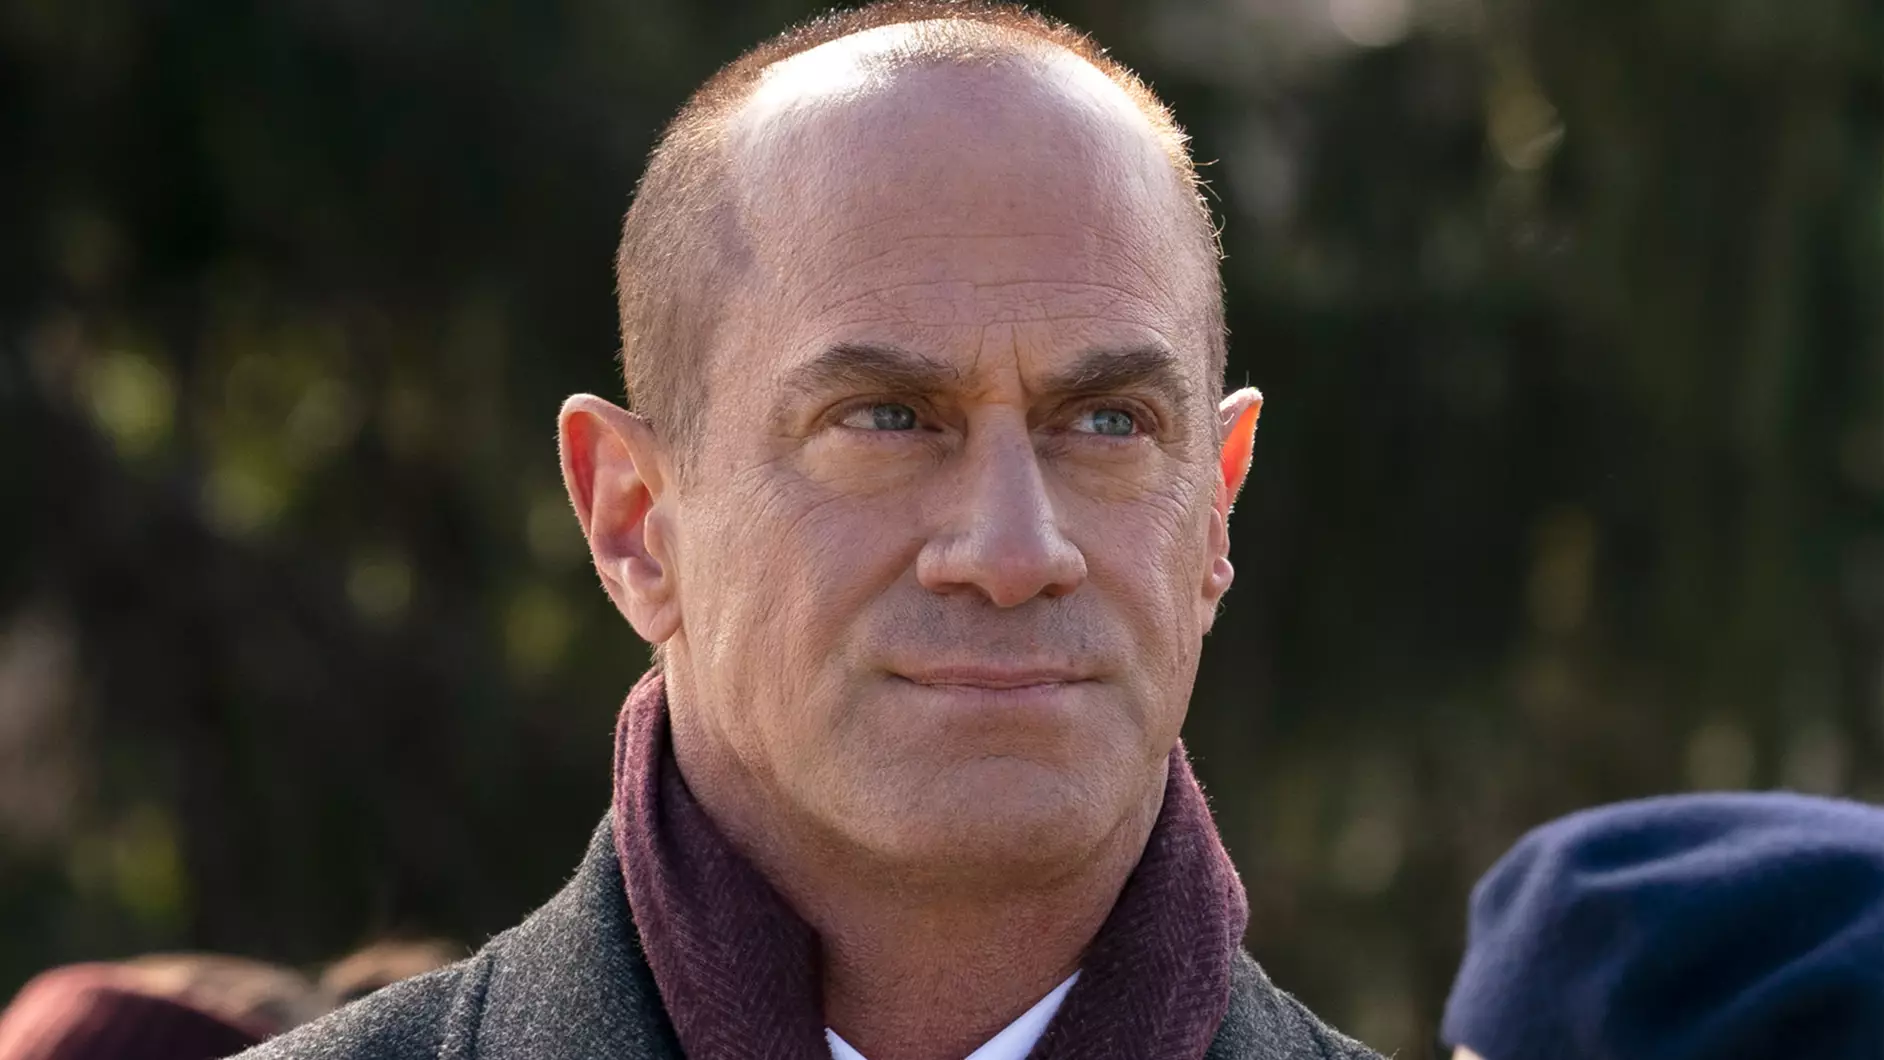 Elliot Stabler's New Law & Order Series Officially Debuts In April